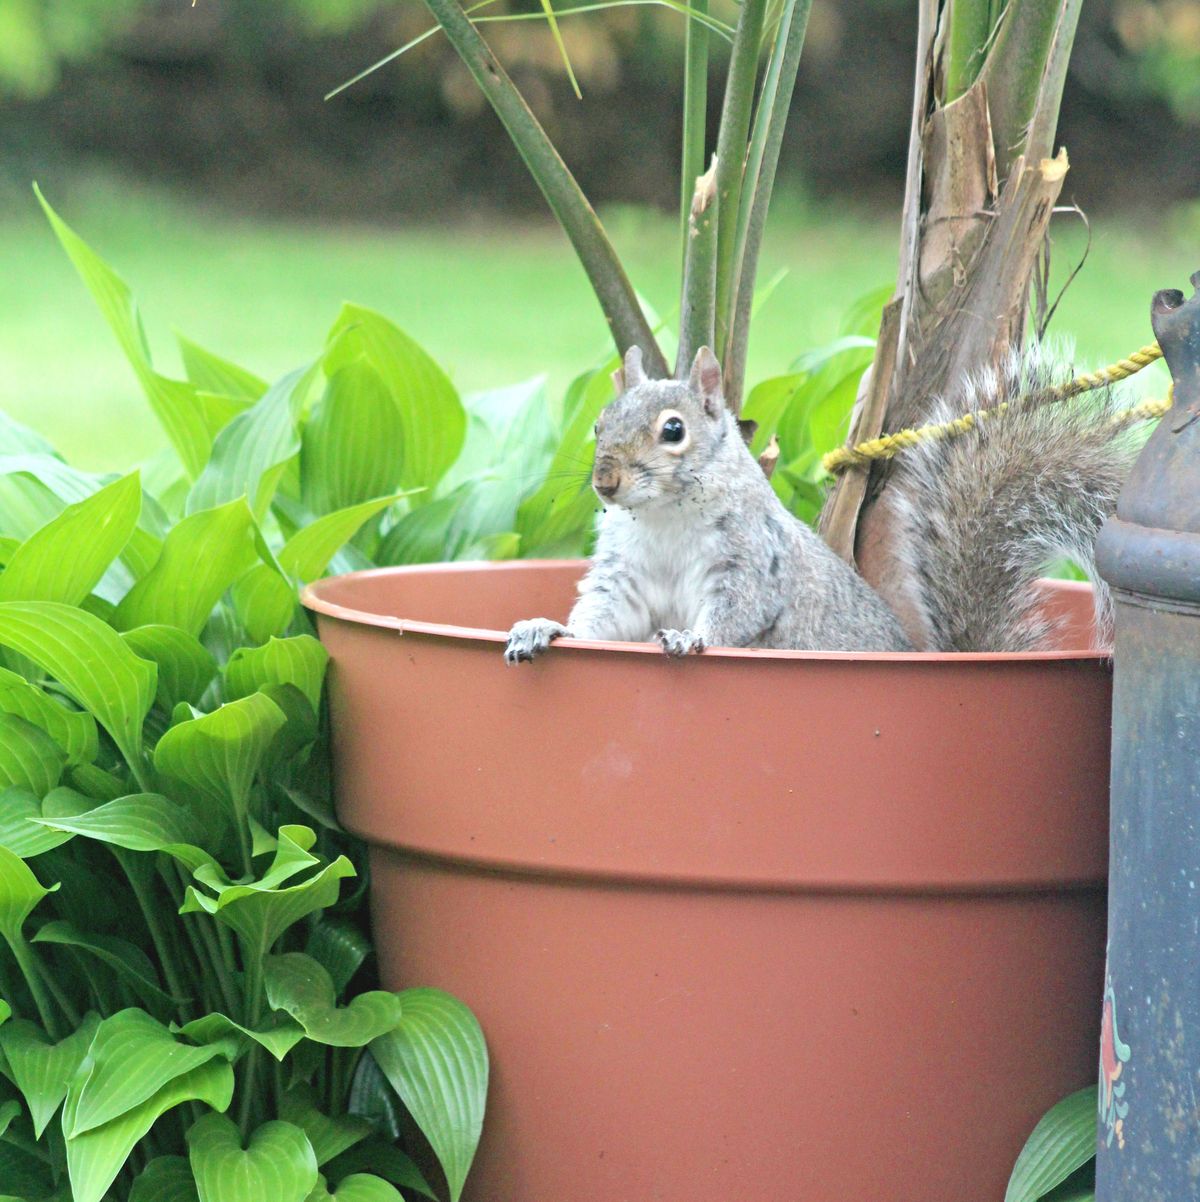 How To Keep Squirrels Out Of Plants How to Keep Squirrels Out of Your Garden - Best Squirrel Repellents